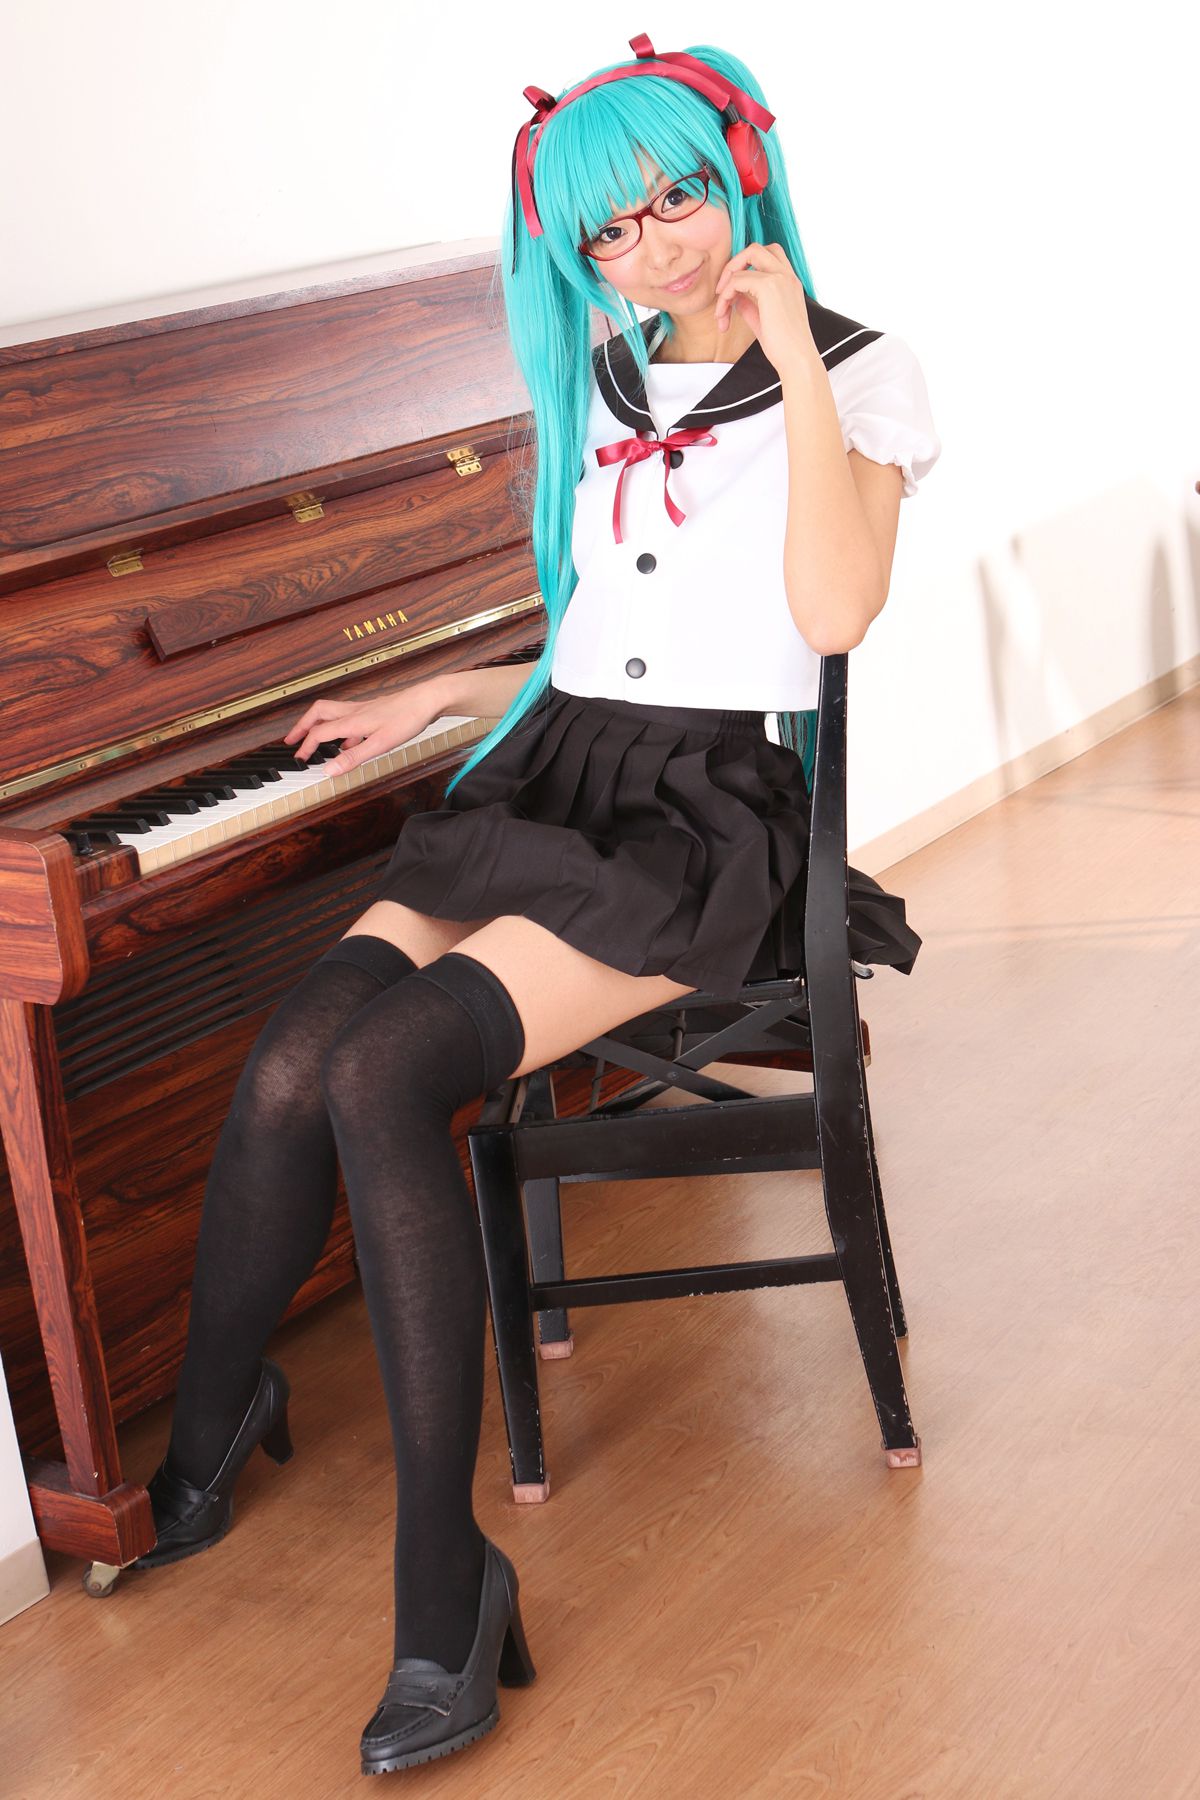 taotuhome[Cosplay套图] New Hatsune Miku from Vocaloid - So Sexy第128张